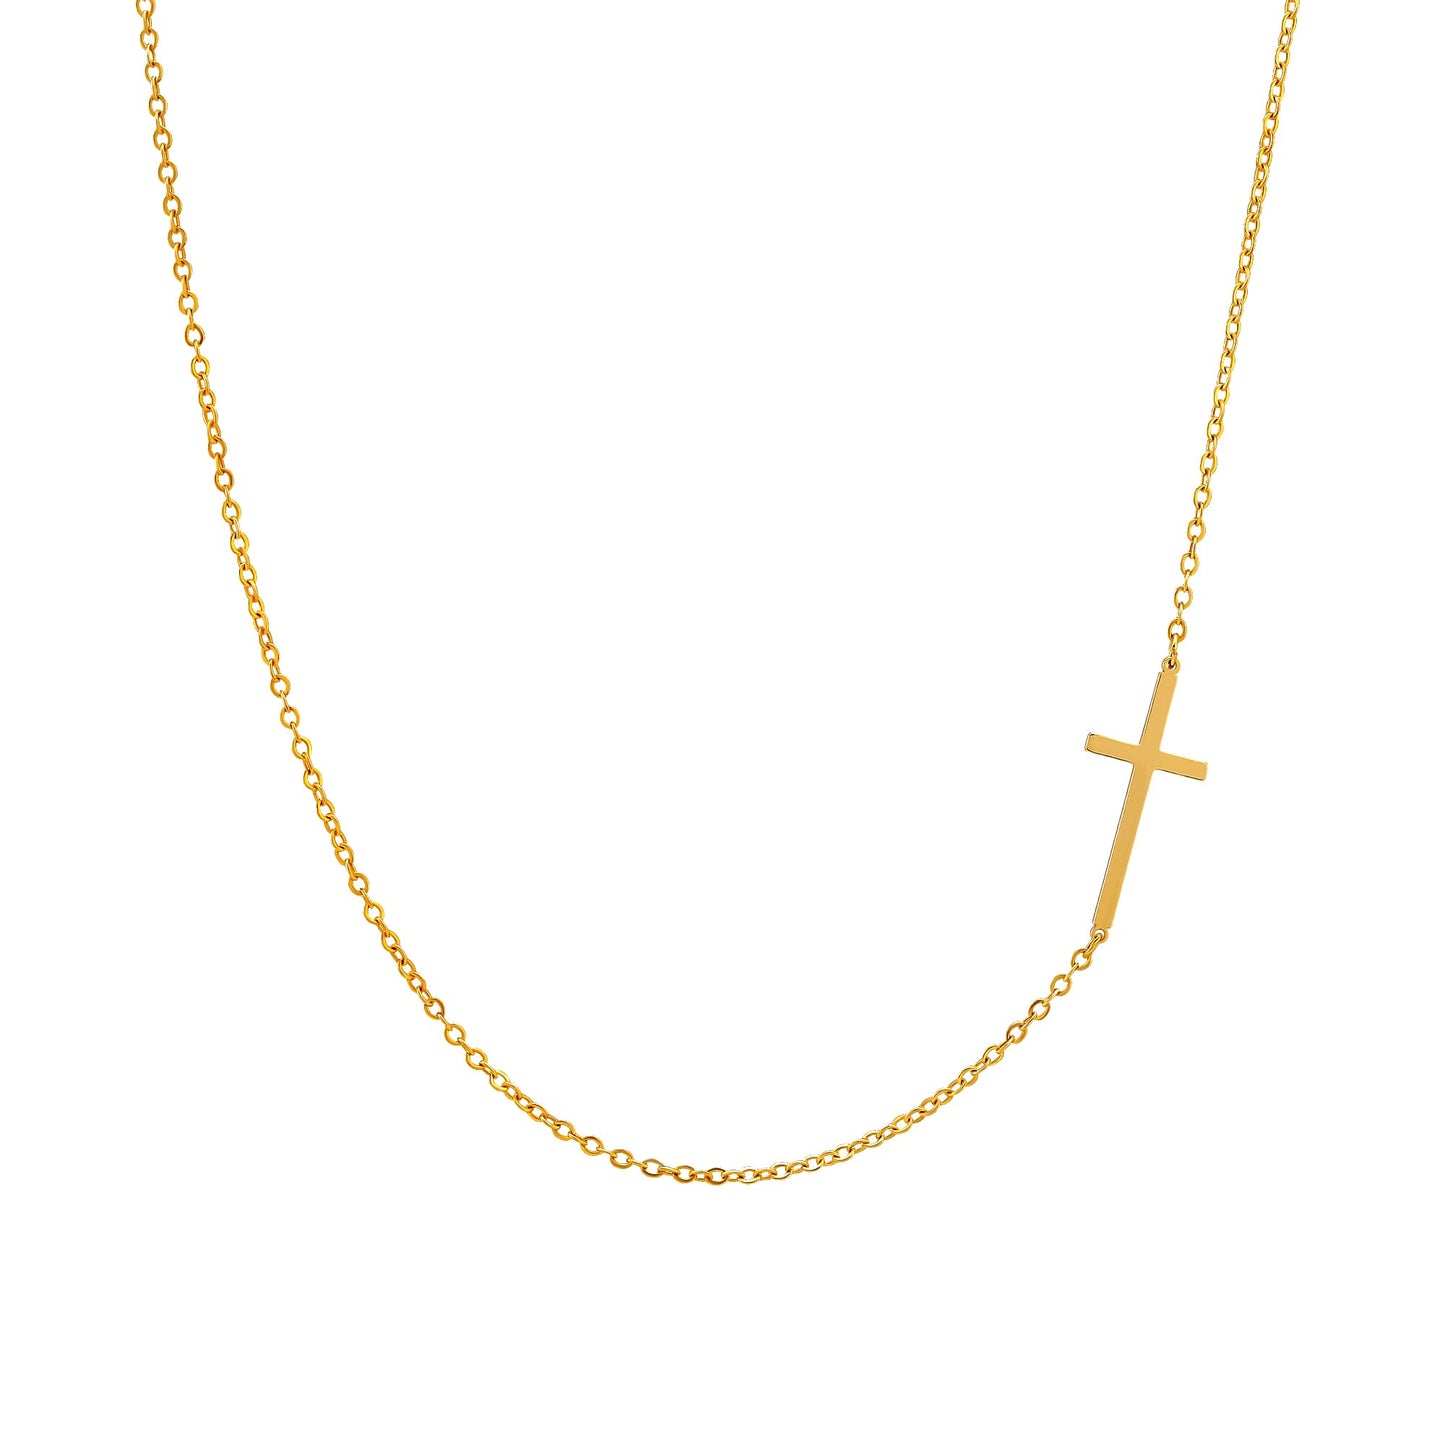 JSJOY Cross Necklace for Women, 14K Gold Plated/Sterling silver Chain Necklace Dainty Layered Gold Cross Pendant Necklace Simple Cute Necklaces for Women Gold Jewelry for Women